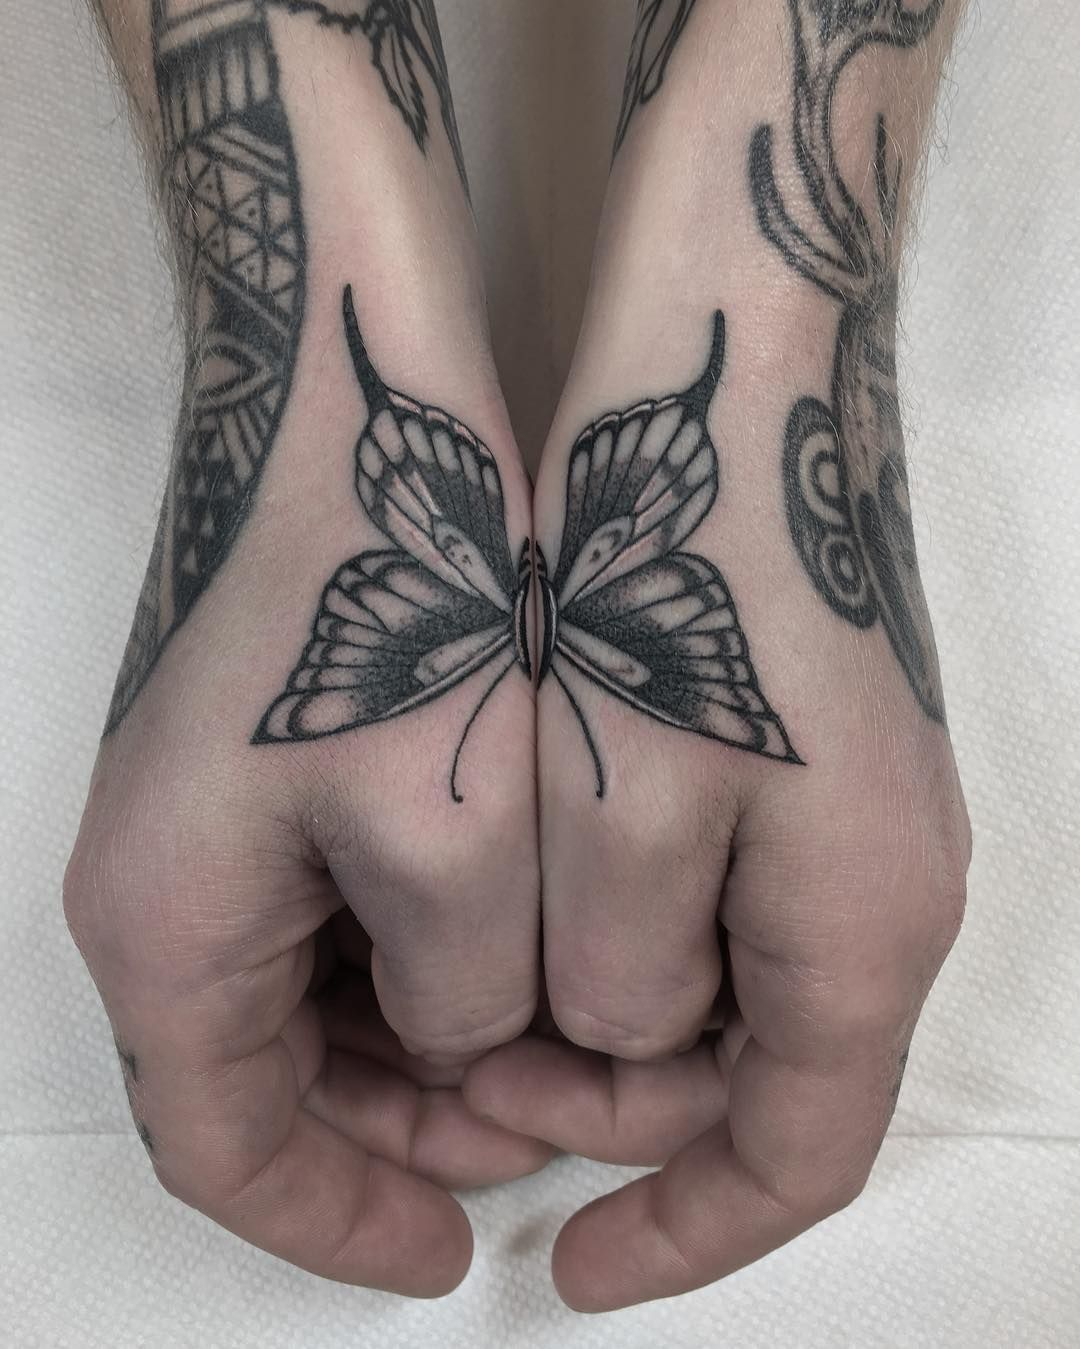 Butterfly Tattoo On The Hand Butterfly Tattoo Ideas Tattoos intended for dimensions 1080 X 1349